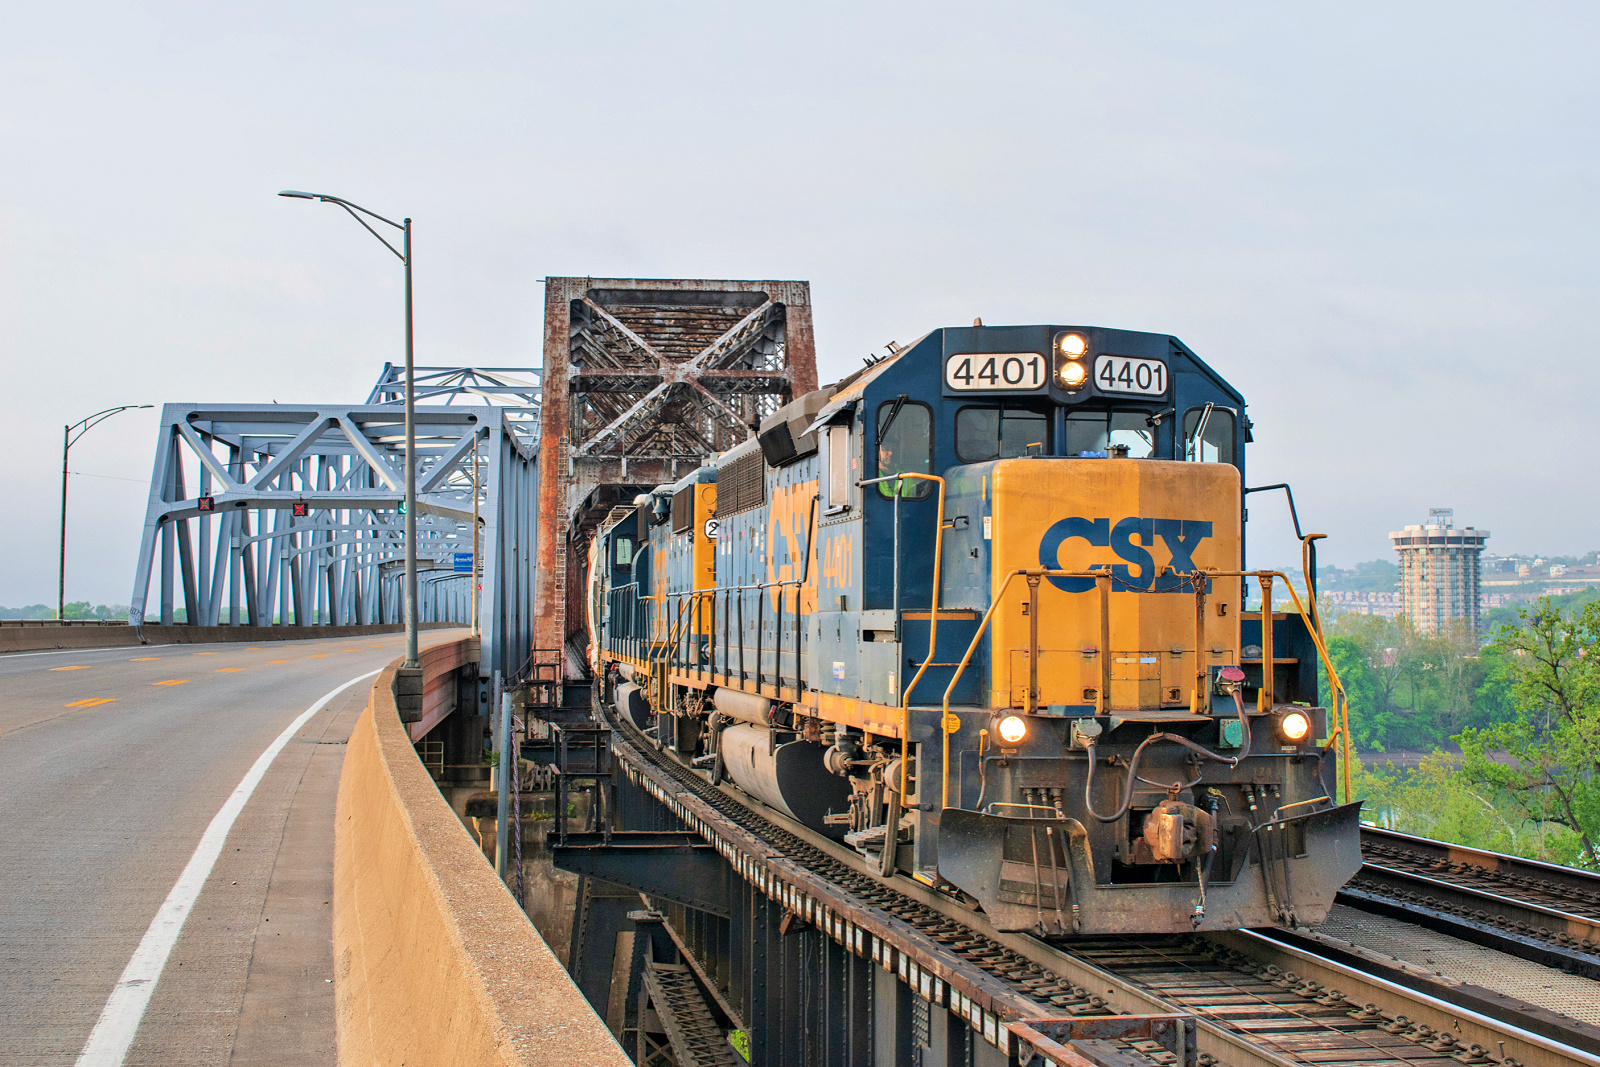 CSXT 4401 is a class EMD GP40-2 and  is pictured in Cincinnati, OH, United States.  This was taken along the Cincinnati Terminal Subdivision on the CSX Transportation. Photo Copyright: David Rohdenburg uploaded to Railroad Gallery on 04/30/2023. This photograph of CSXT 4401 was taken on Saturday, April 29, 2023. All Rights Reserved. 